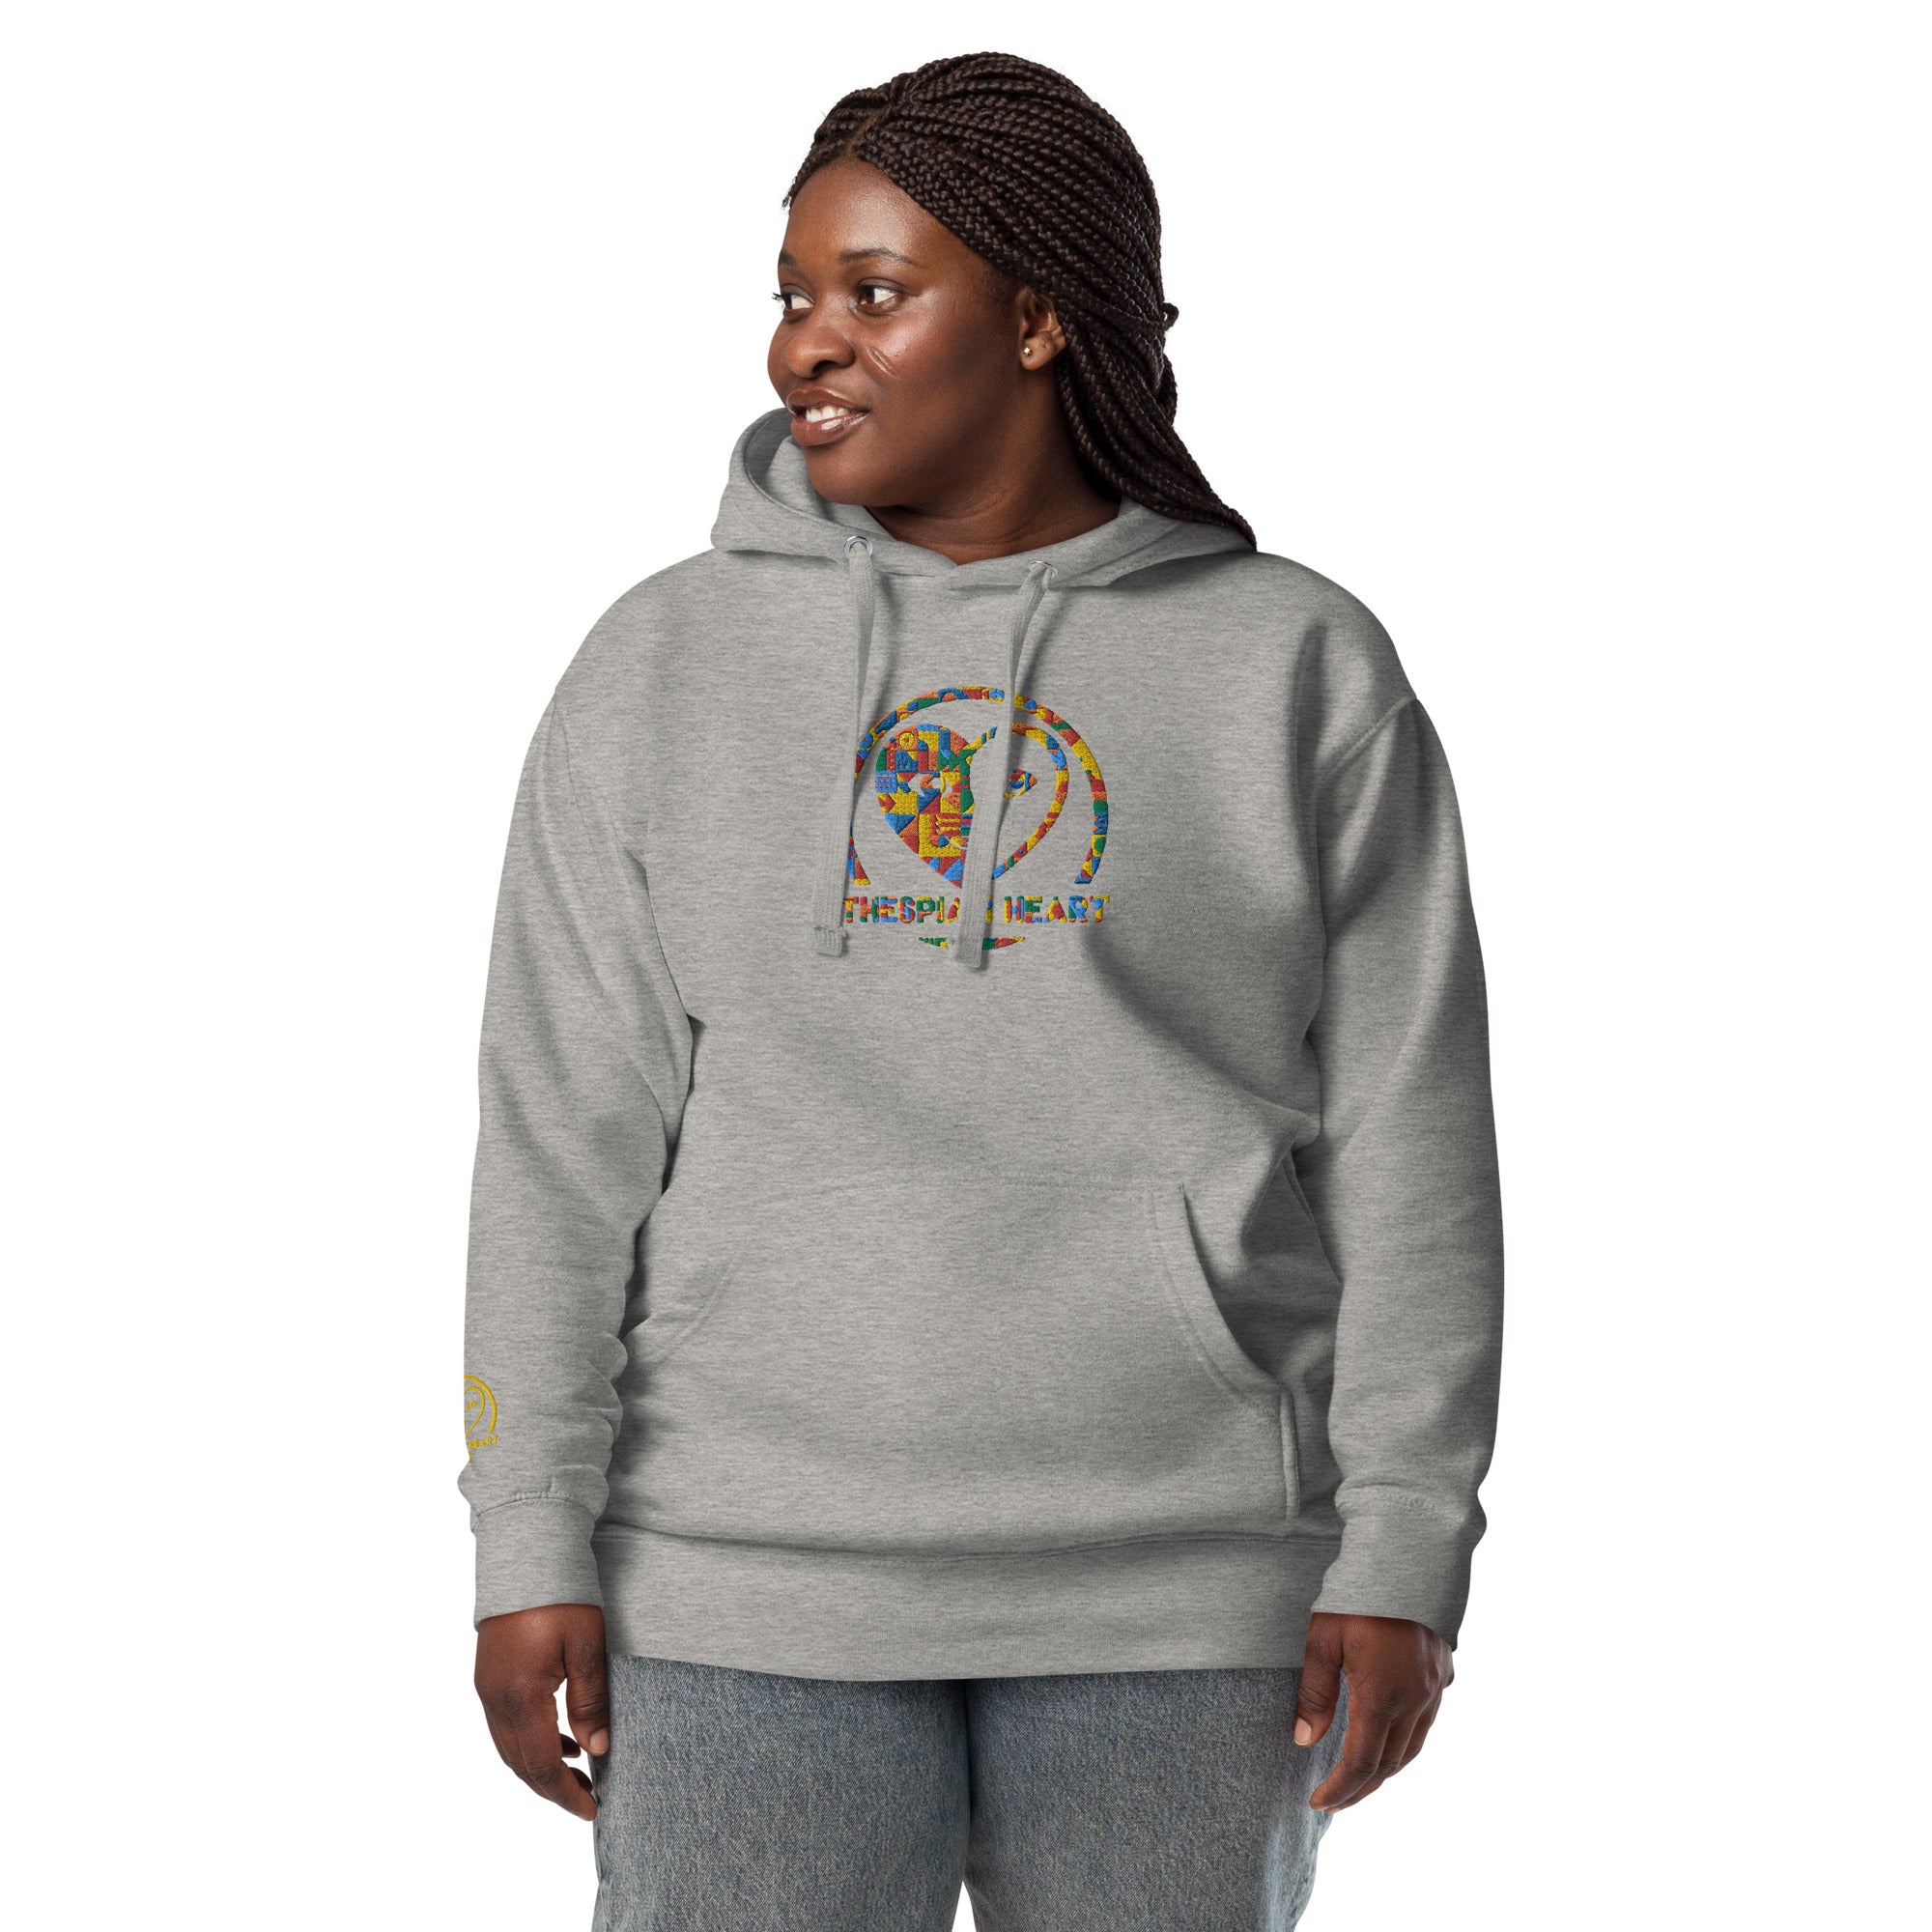 Thespian Heart Logo - Colorful Embroidered Premium Unisex Hoodie